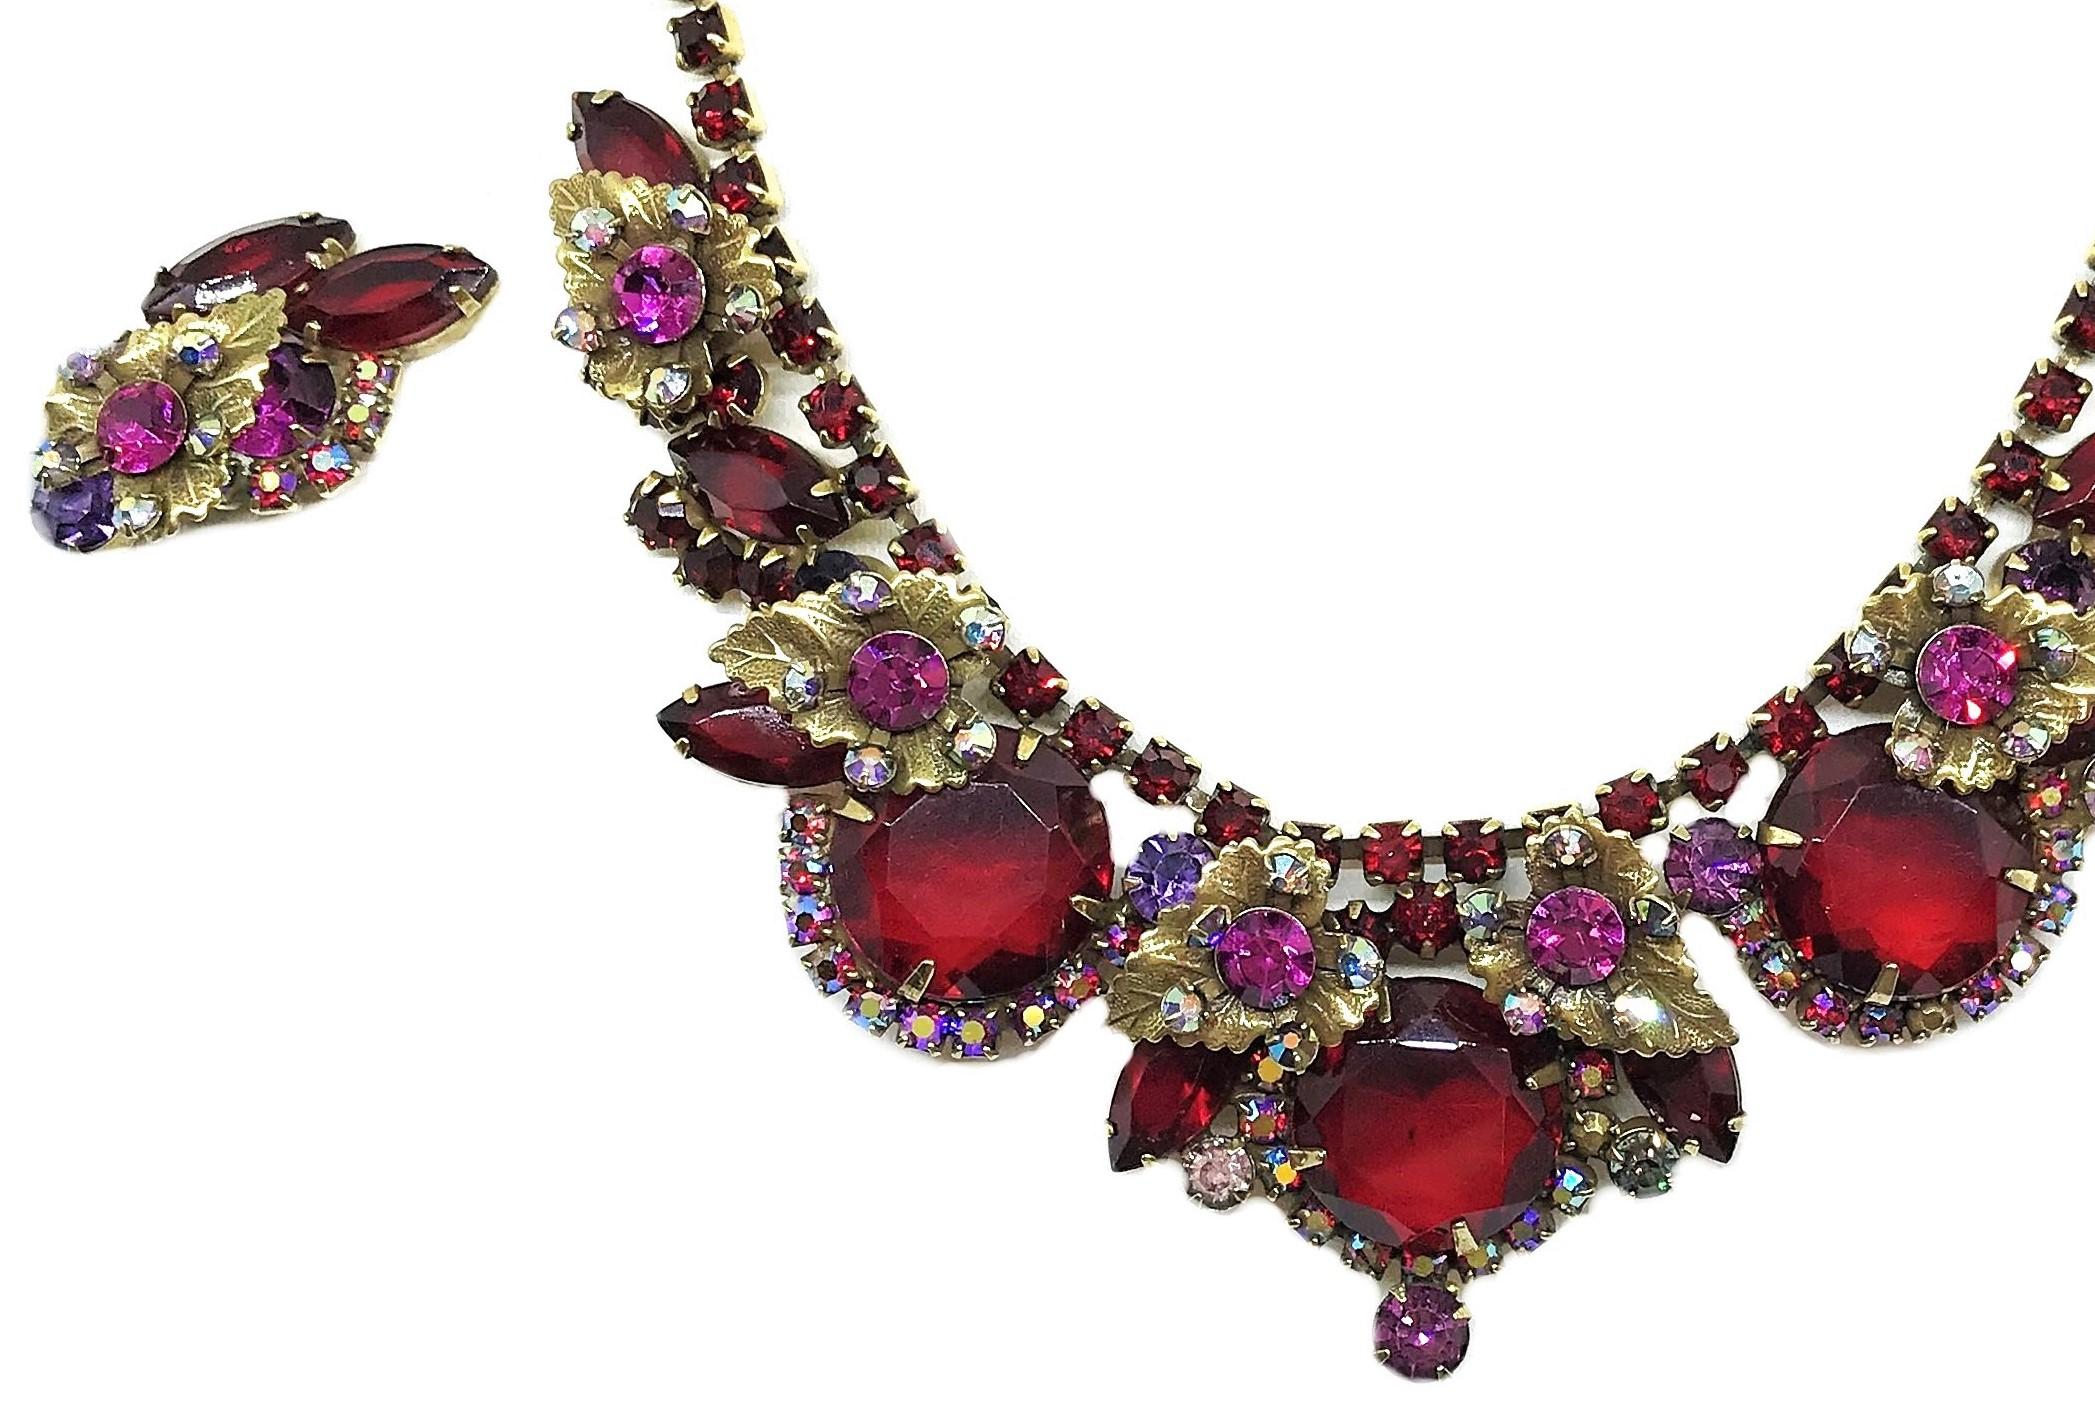 Circa 1960s Juliana necklace and earring set by De Lizza and Elster of New York.  The gold tone metal necklace and clip back earrings are prong set with large red faceted glass round and marquis stones, and embellished with gold leaves, bright pink